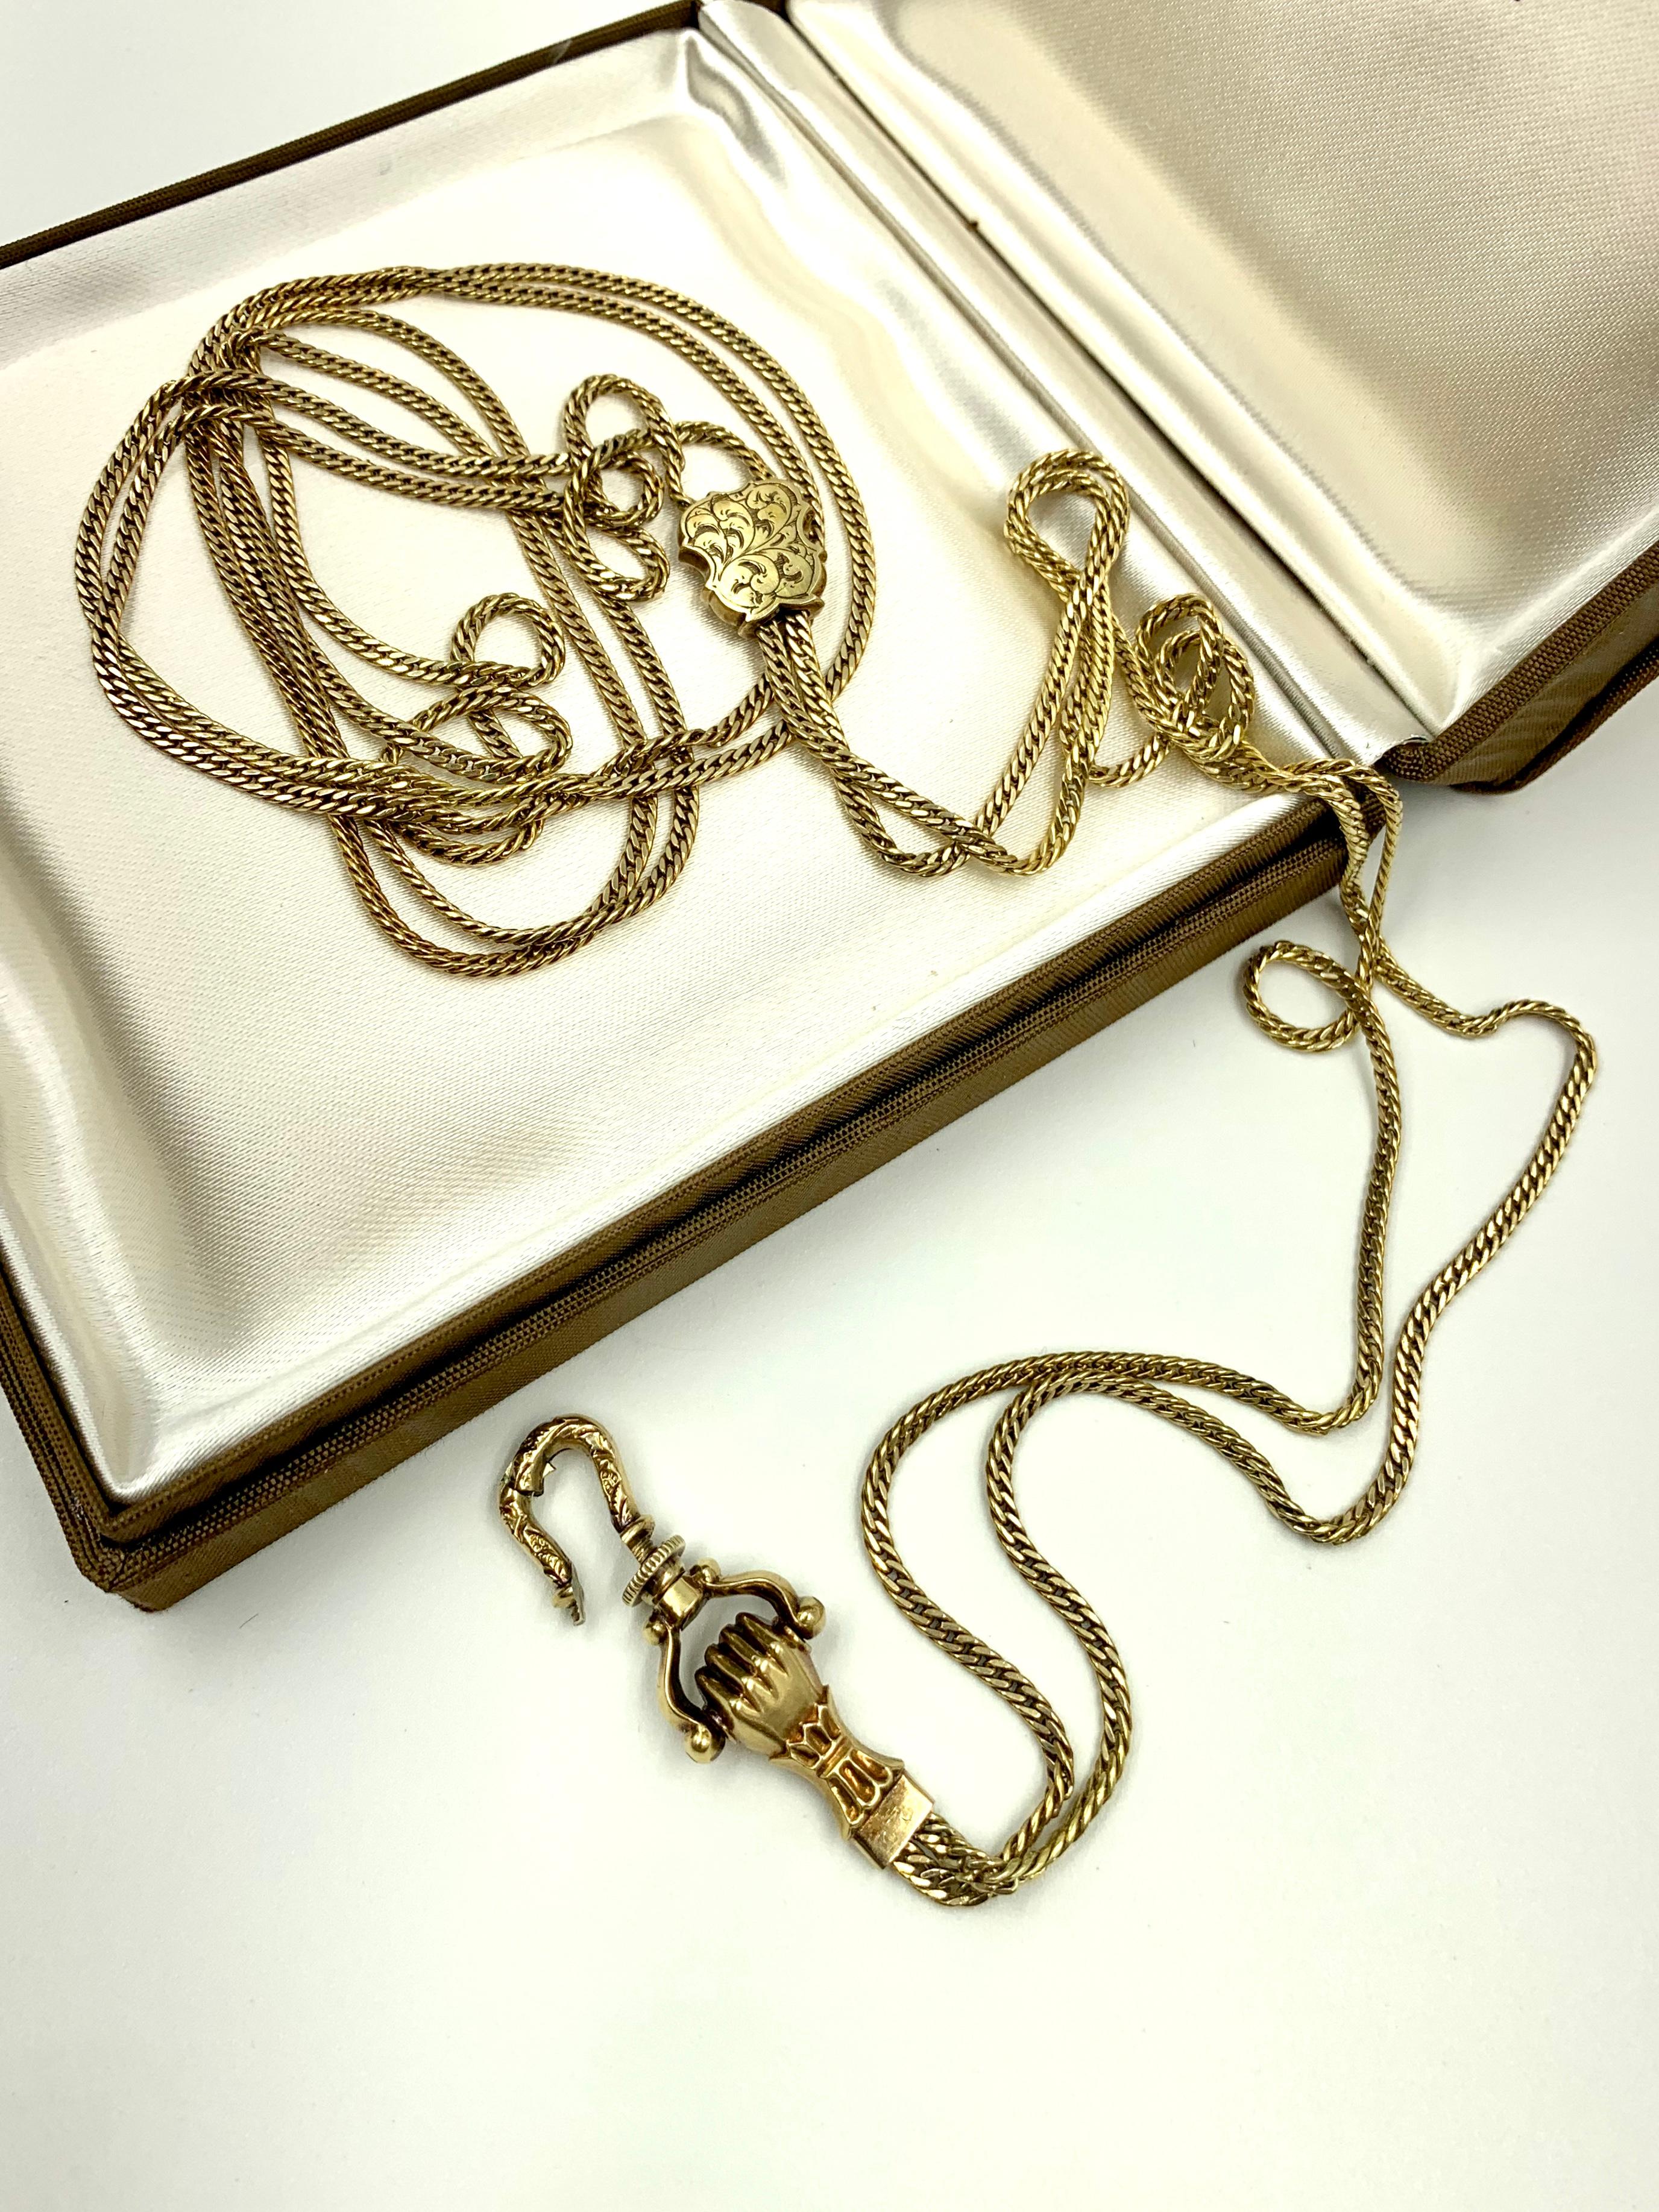 Exceptionally Long Antique 18K Gold Mano Sautoir Slide Chain Necklace Circa 1840 For Sale 8